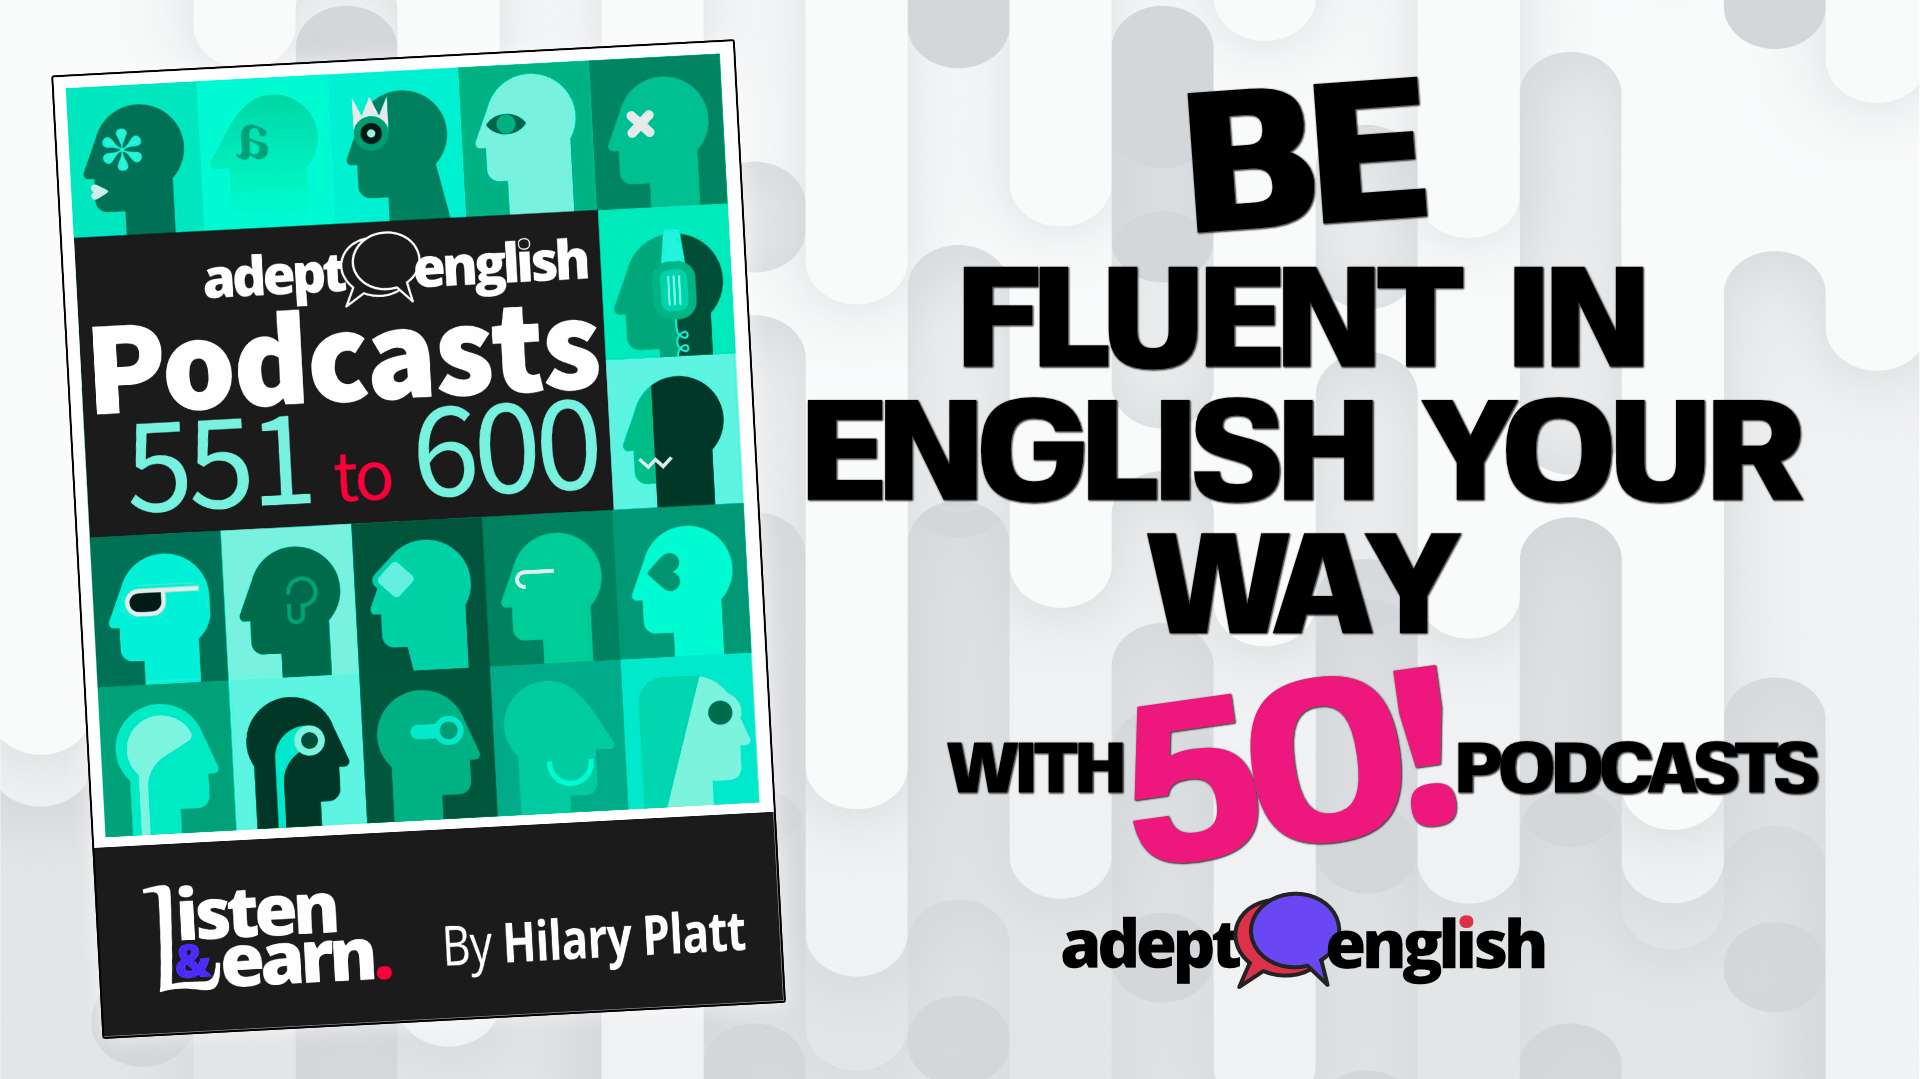 These English audio lessons are engaging and fun and they will help you tremendously.